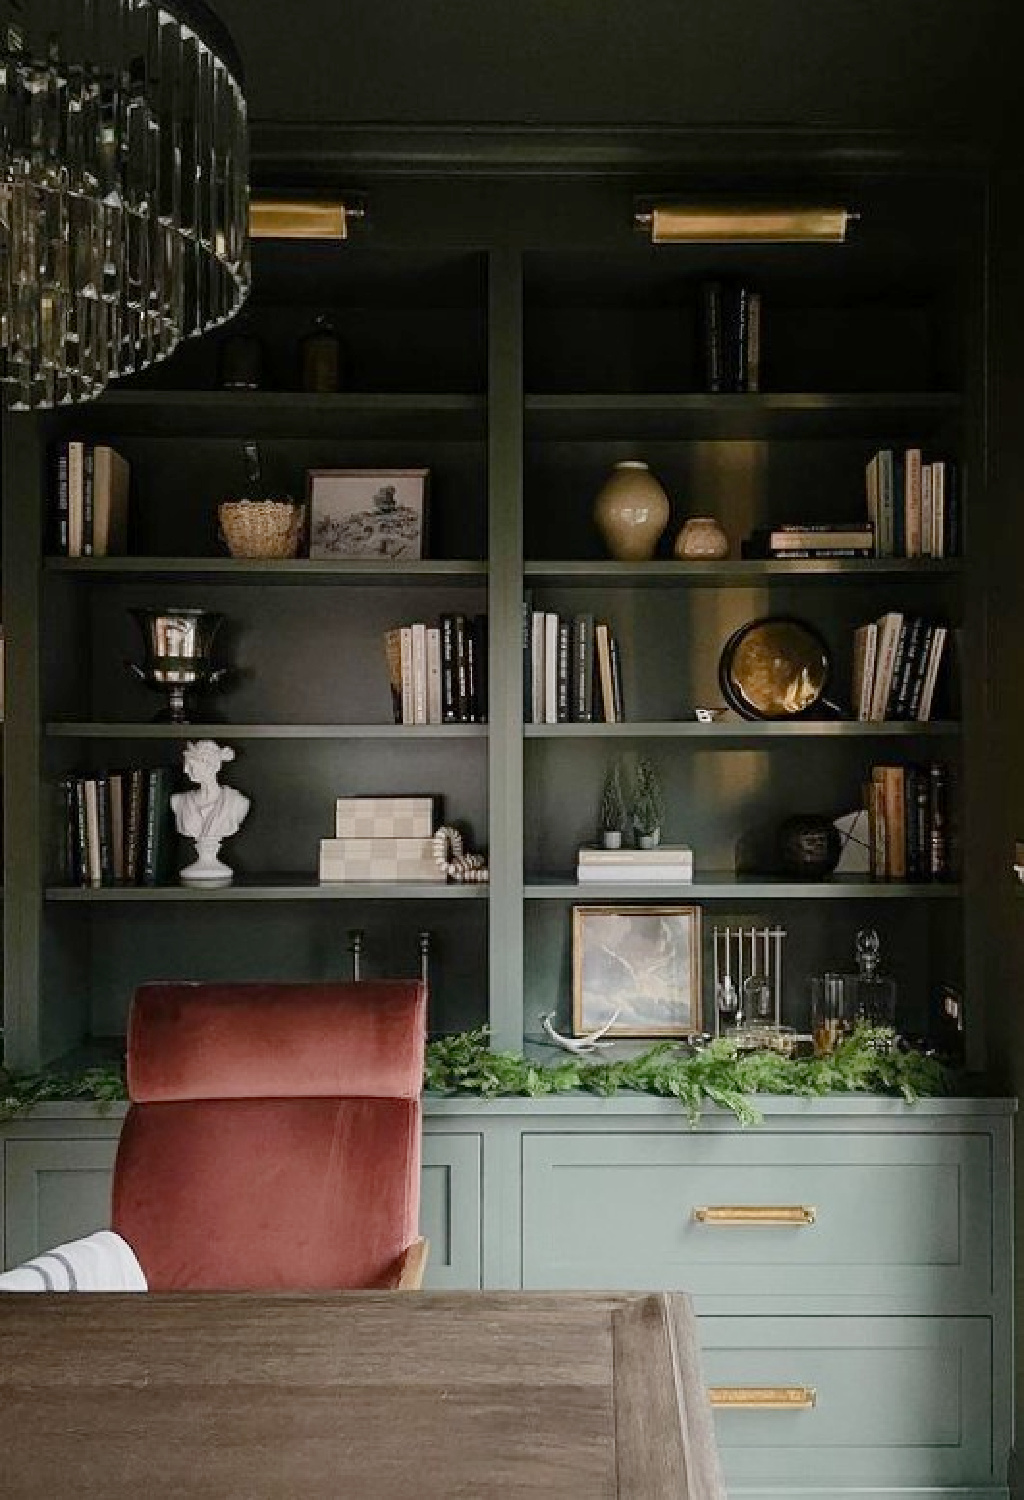 Sherwin-Williams Rosemary painted built-ins in a home office by Emily White @werethewhites_. #sherwinwilliamsrosemary